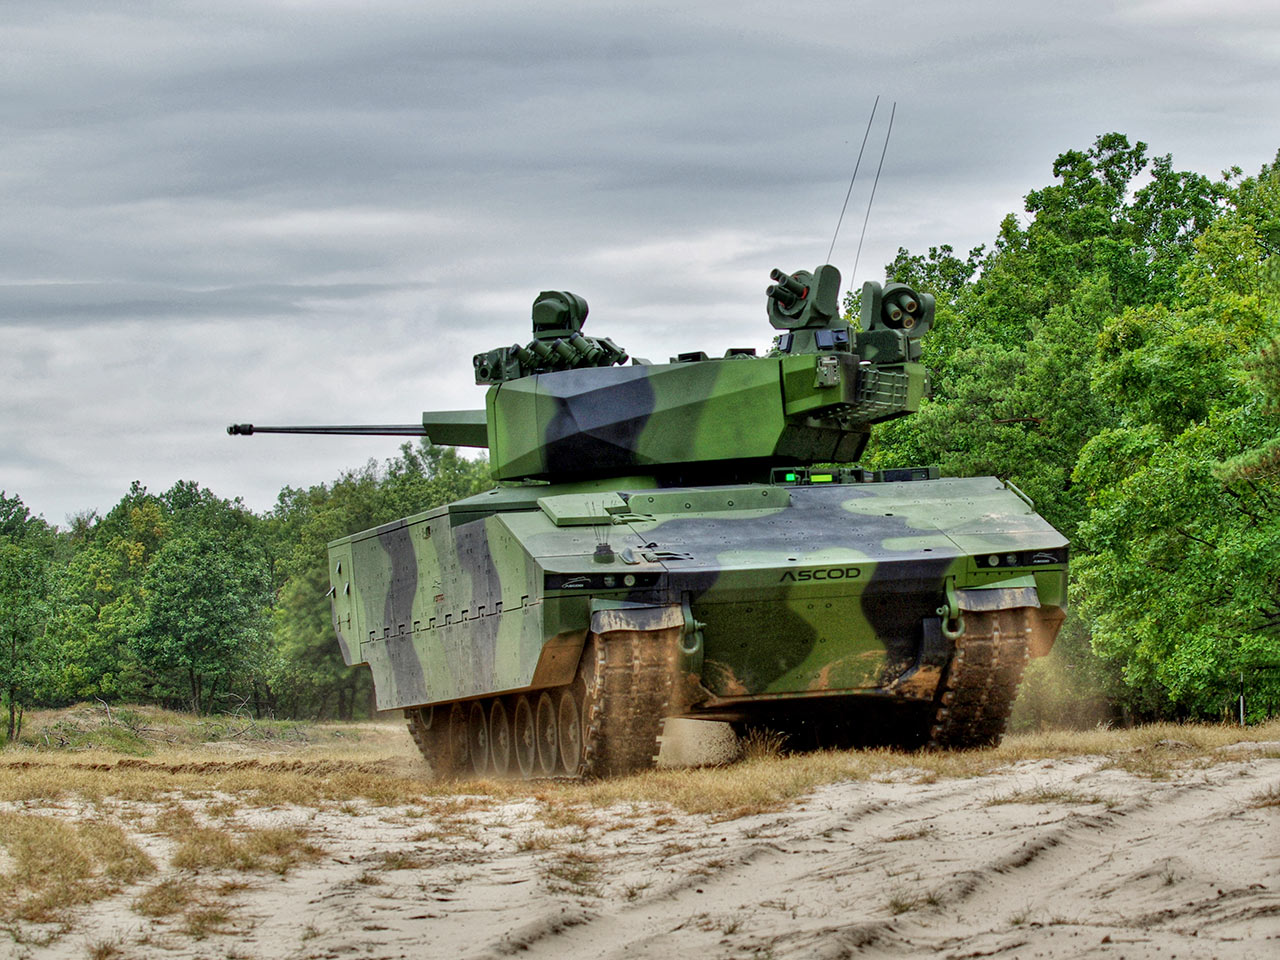 GDELS ASCOD 42 Infantry Fighting Vehicle